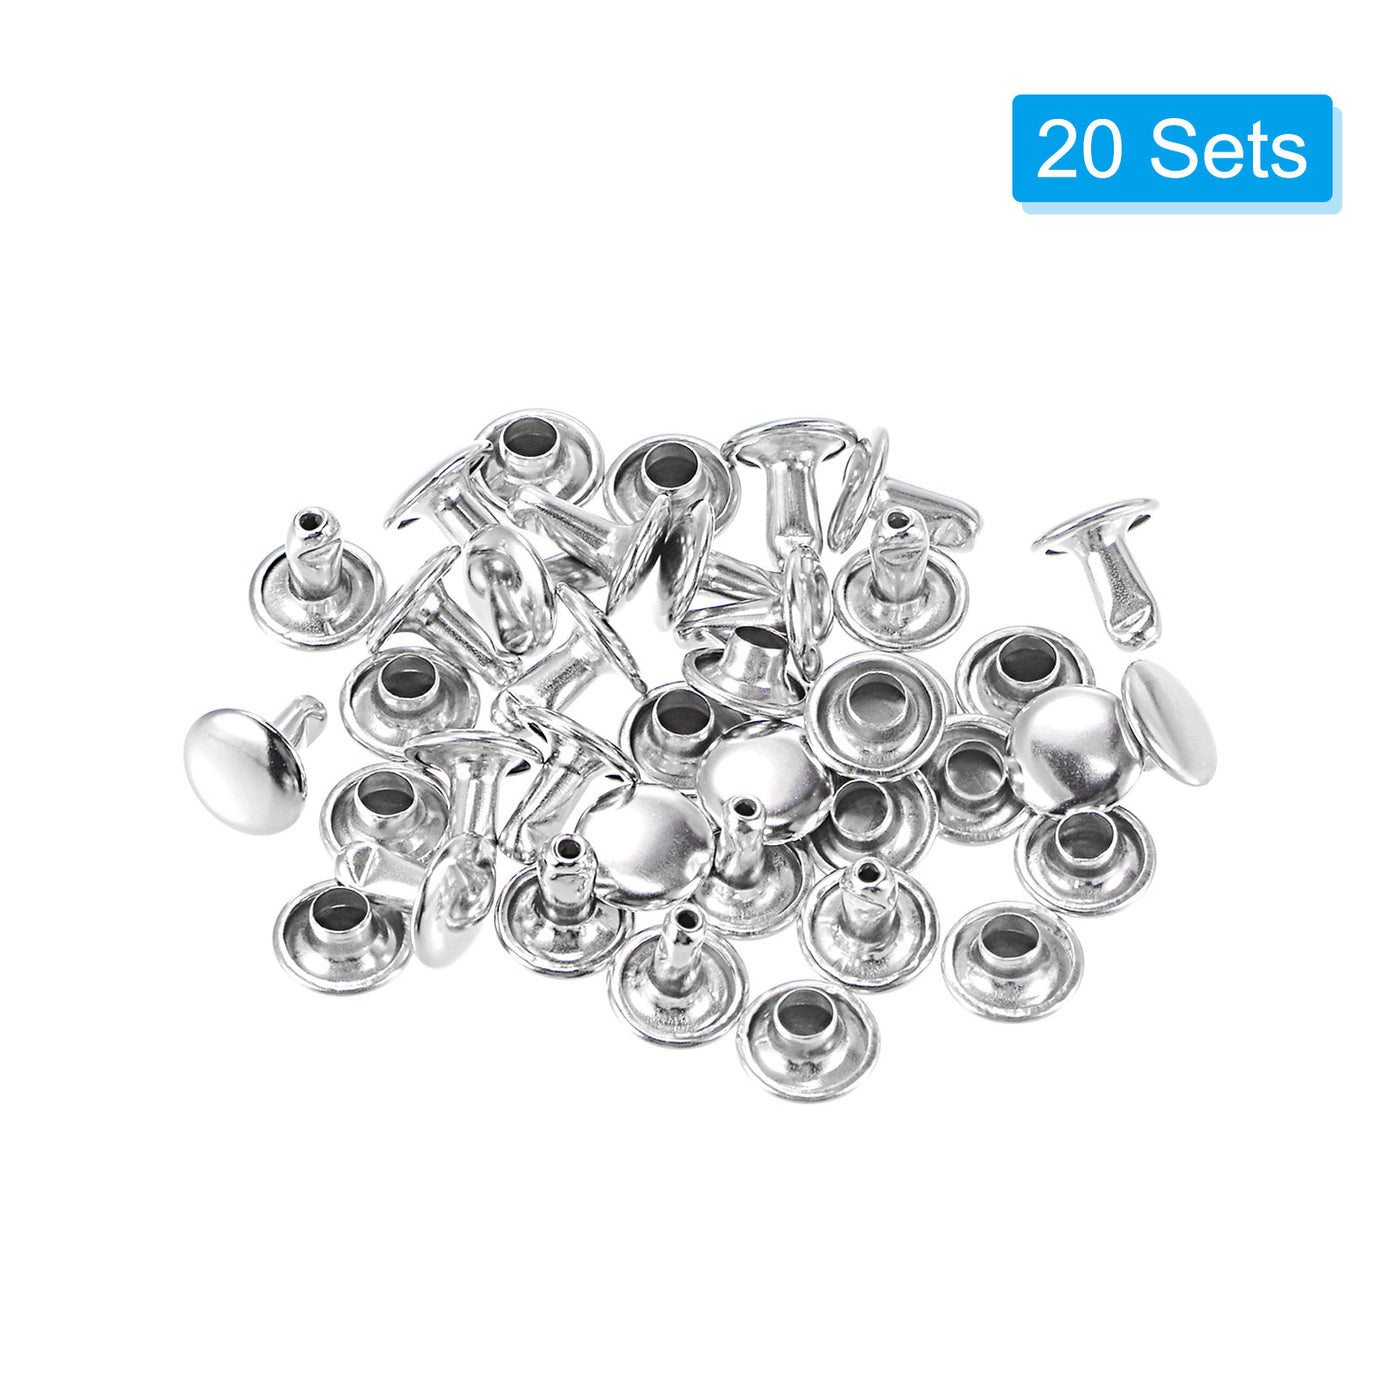 uxcell Uxcell 20 Sets Leather Rivets Silver Tone 8mm Double Cap Brass Rivet Leather Studs